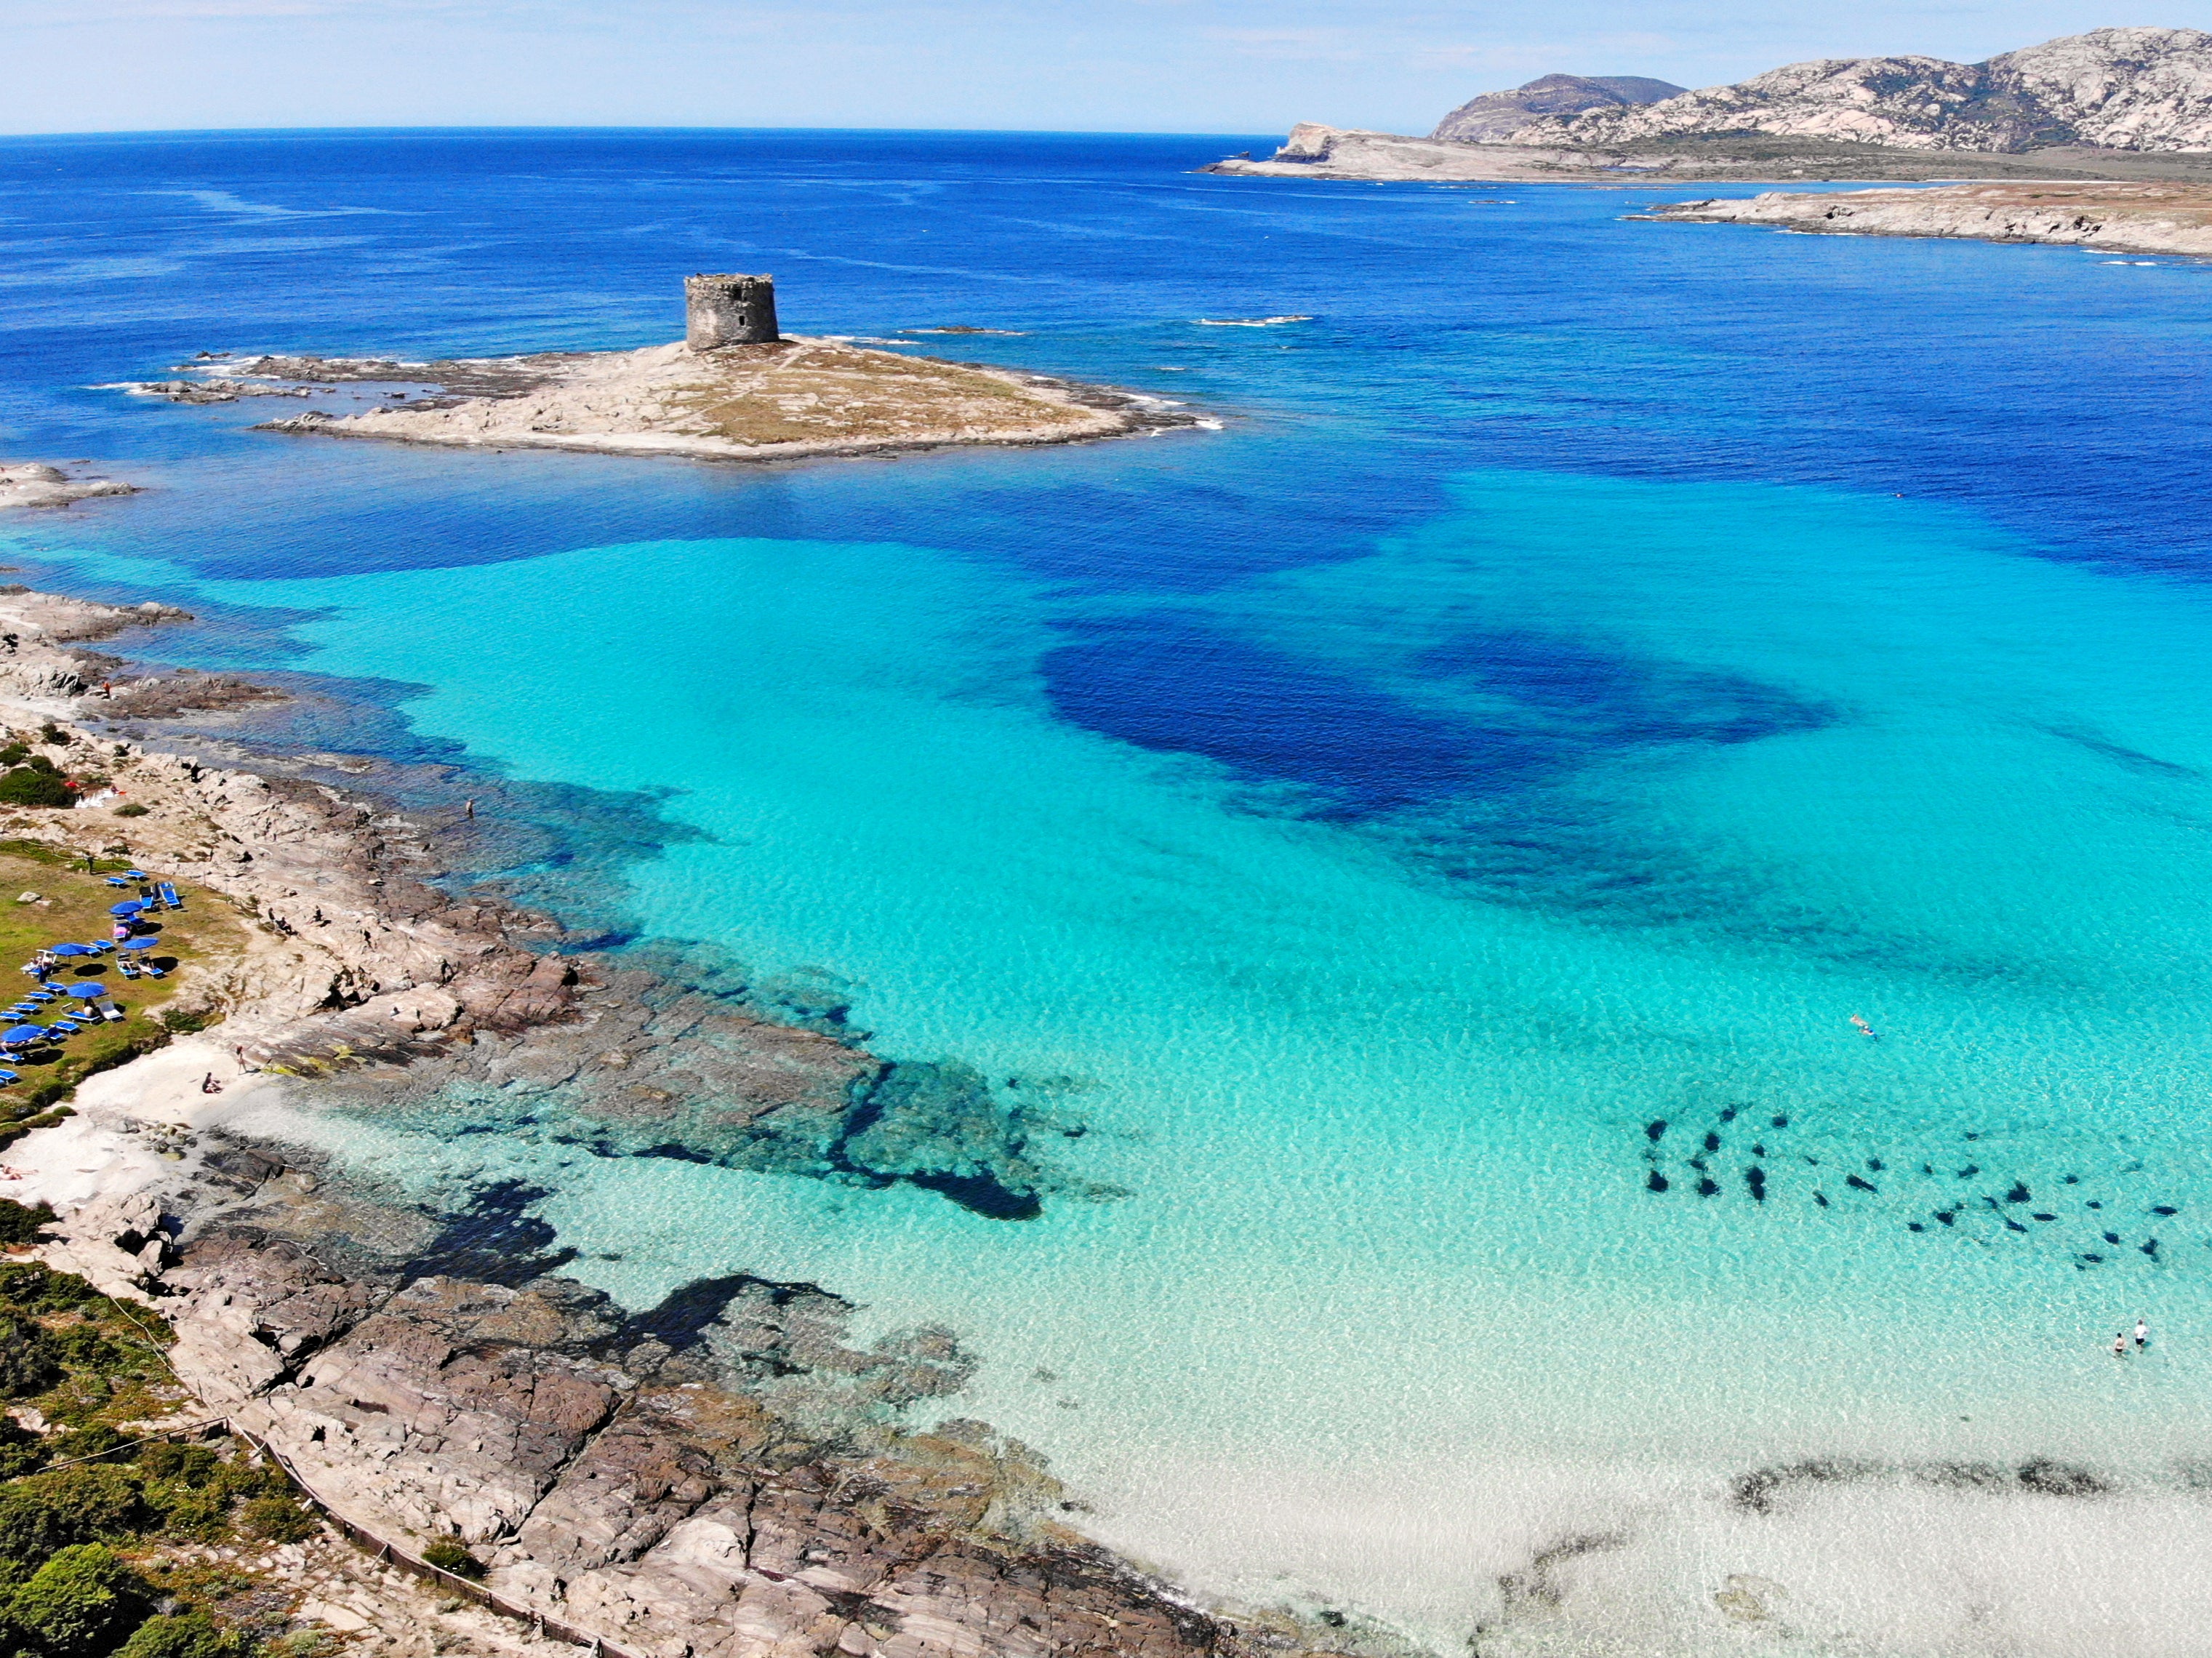 La Pelosa tower, on the northwestern tip of Sardinia, dates from the 16th century